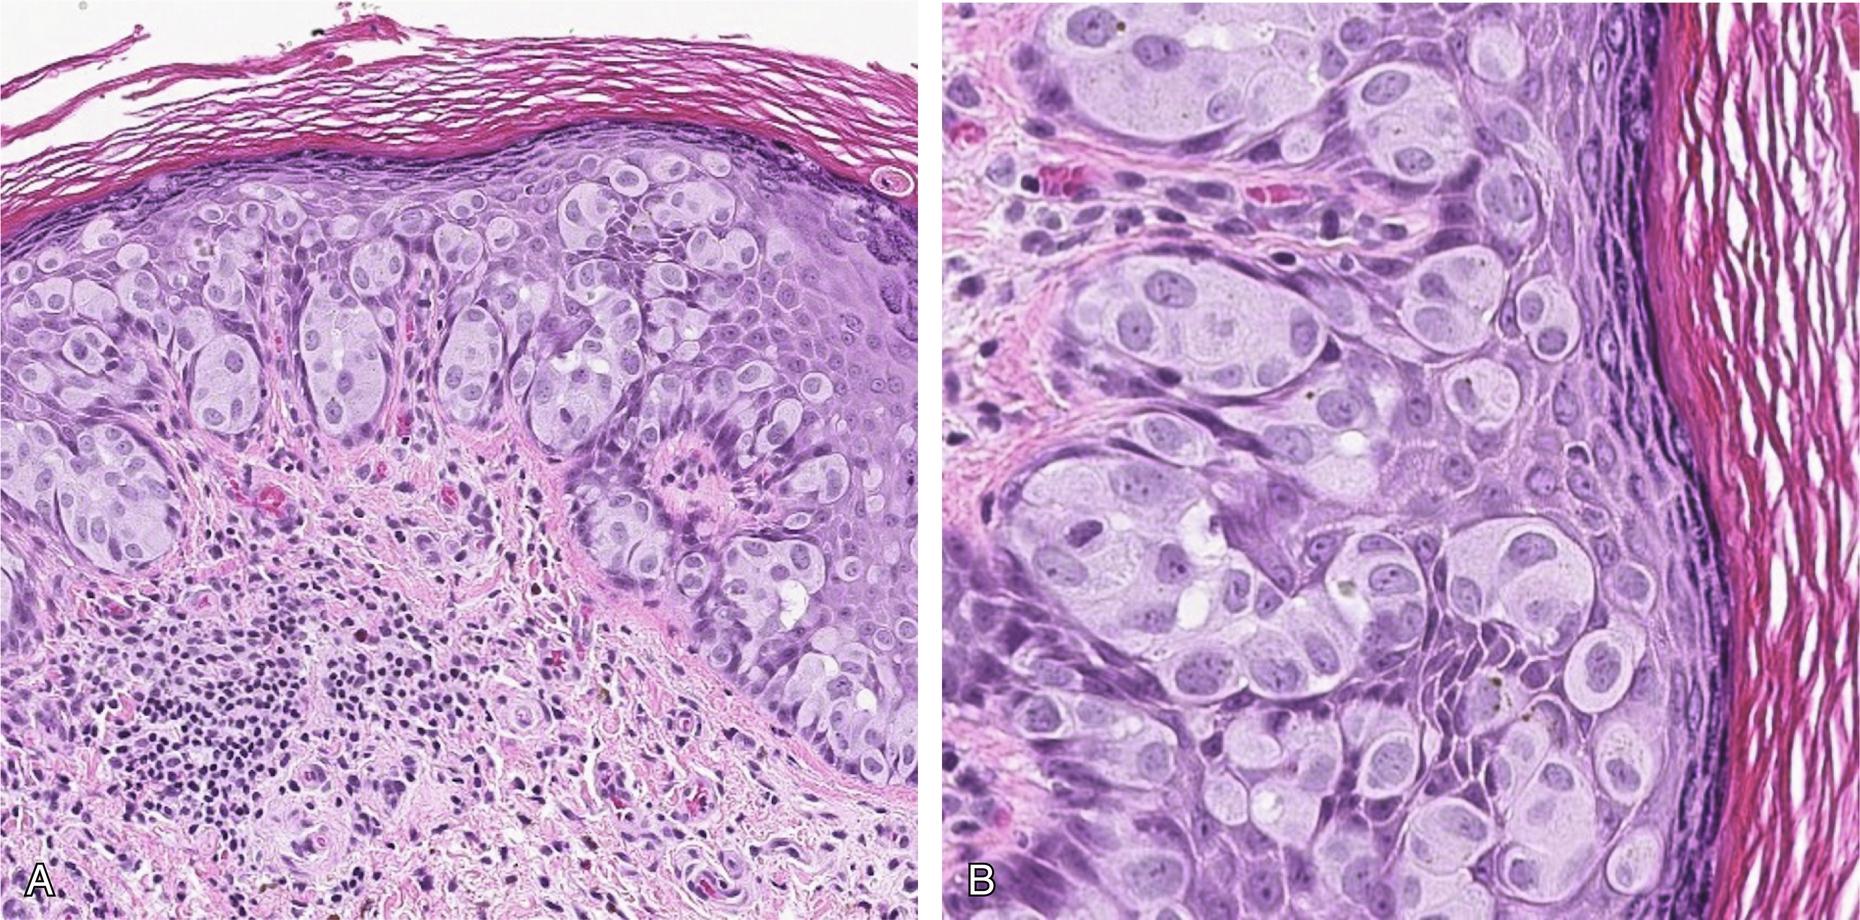 Fig. 19.2, Paget disease cells in nests and clusters involving squamous mucosa (A), Paget cells showing abundant cytoplasm, enlarged nuclei, and prominent nucleoli (B).